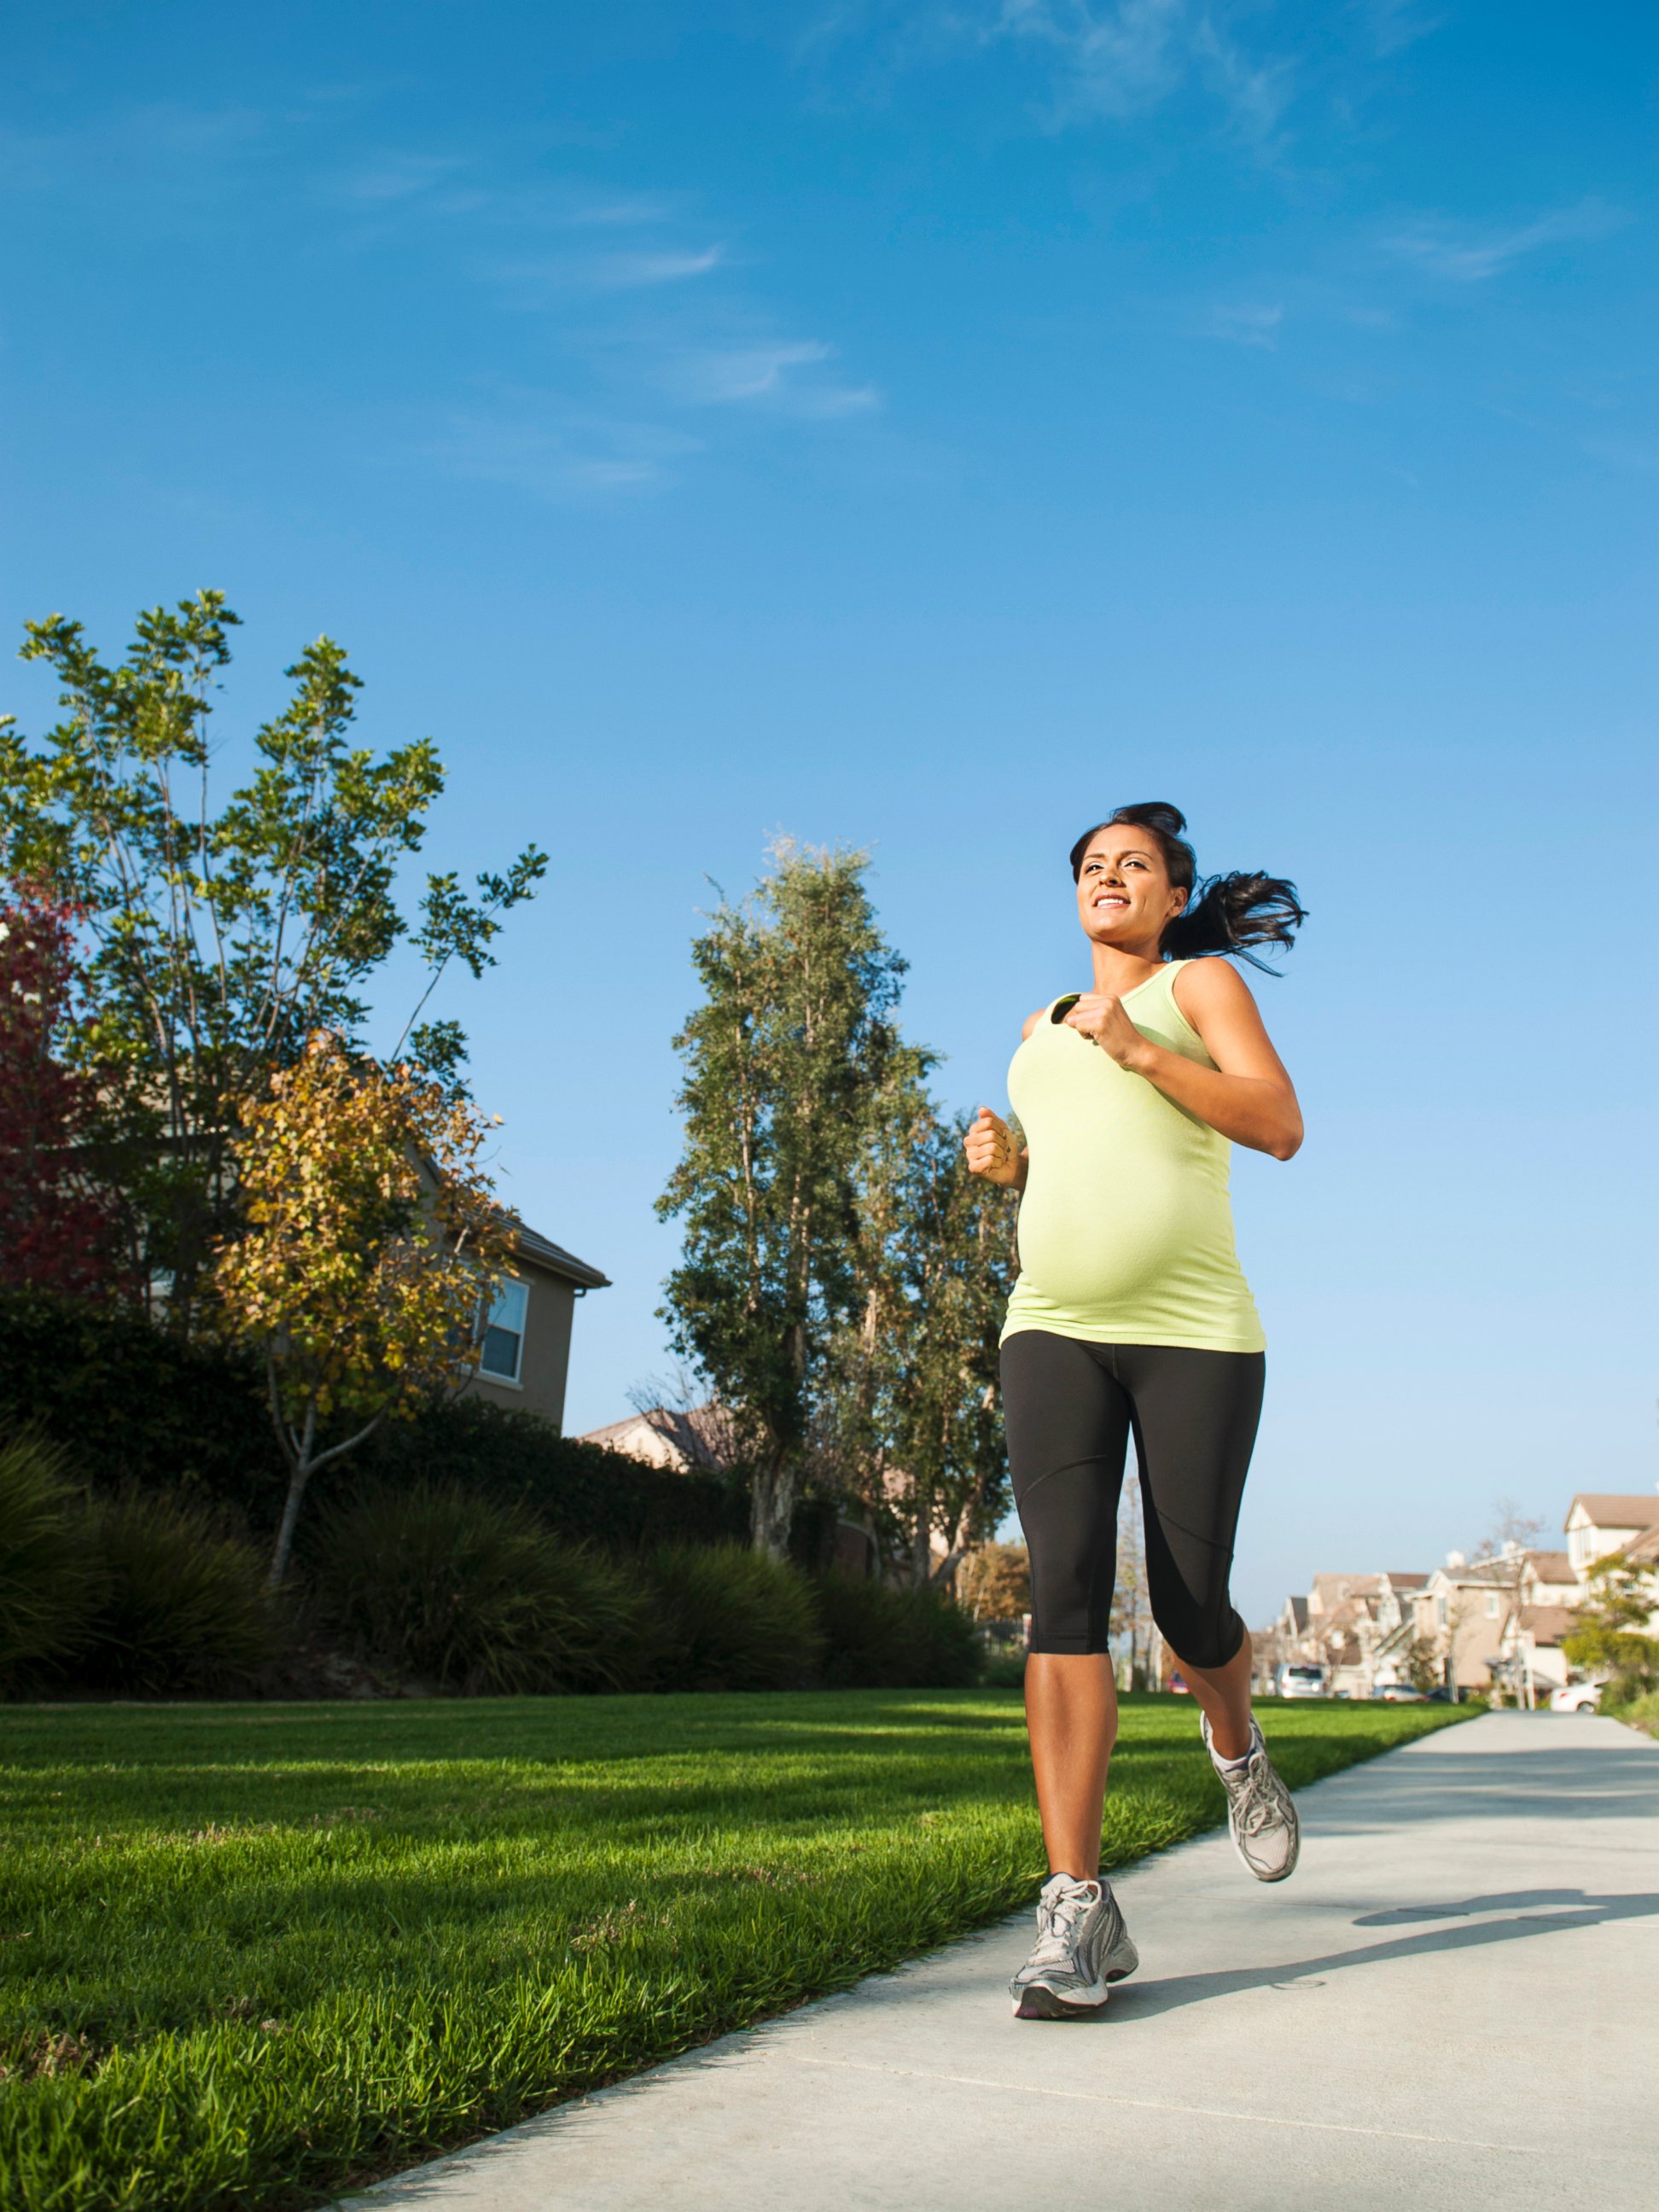 PHOTO: Is running while pregnant safe? Some say yes.